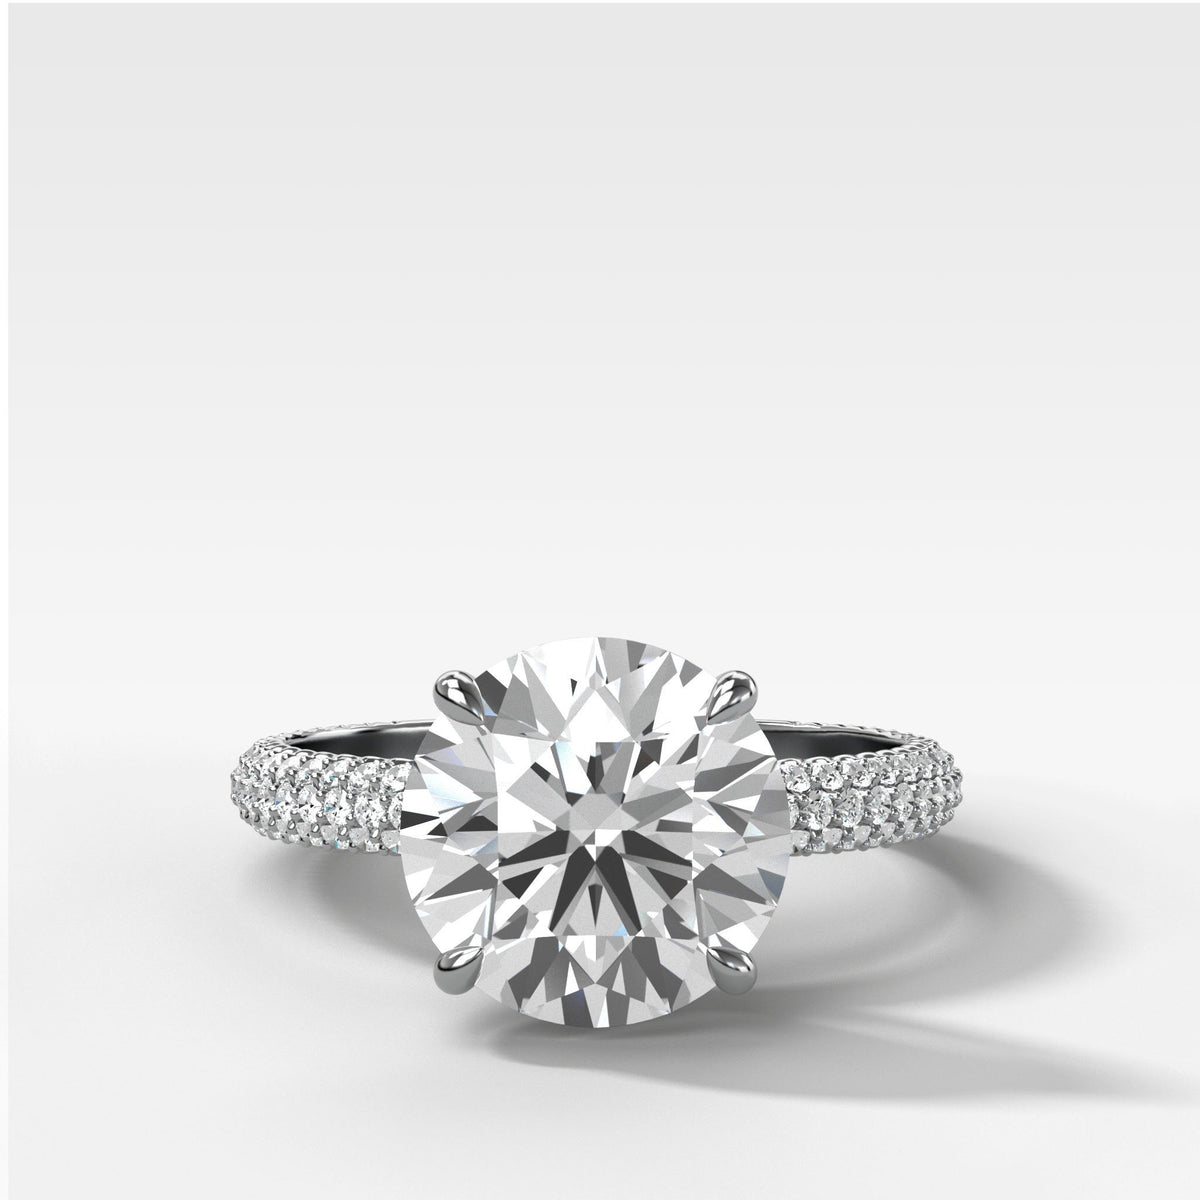 Triple Row Pav≈Ω Engagement Ring With Round Cut by Good Stone in White Gold